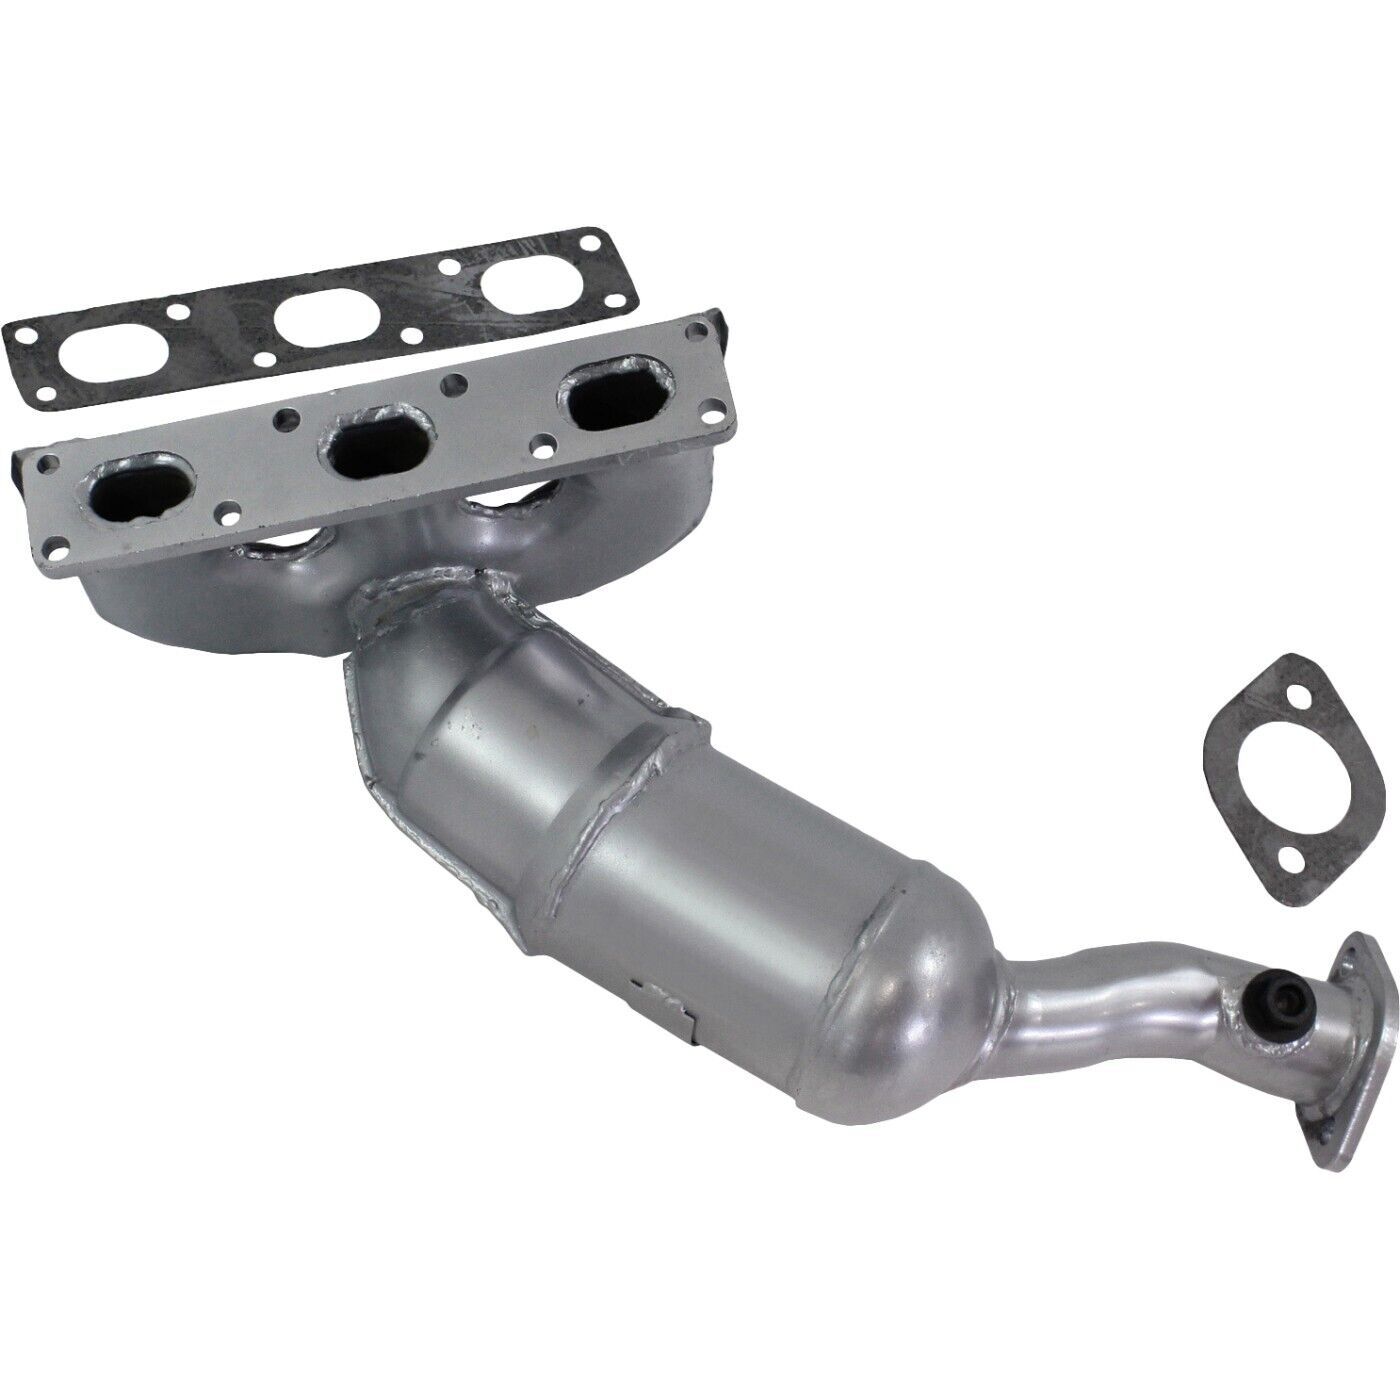 Catalytic Converter 46-State Legal For 2001-03 BMW 525i 530i 01-06 X5 3.0L Rear